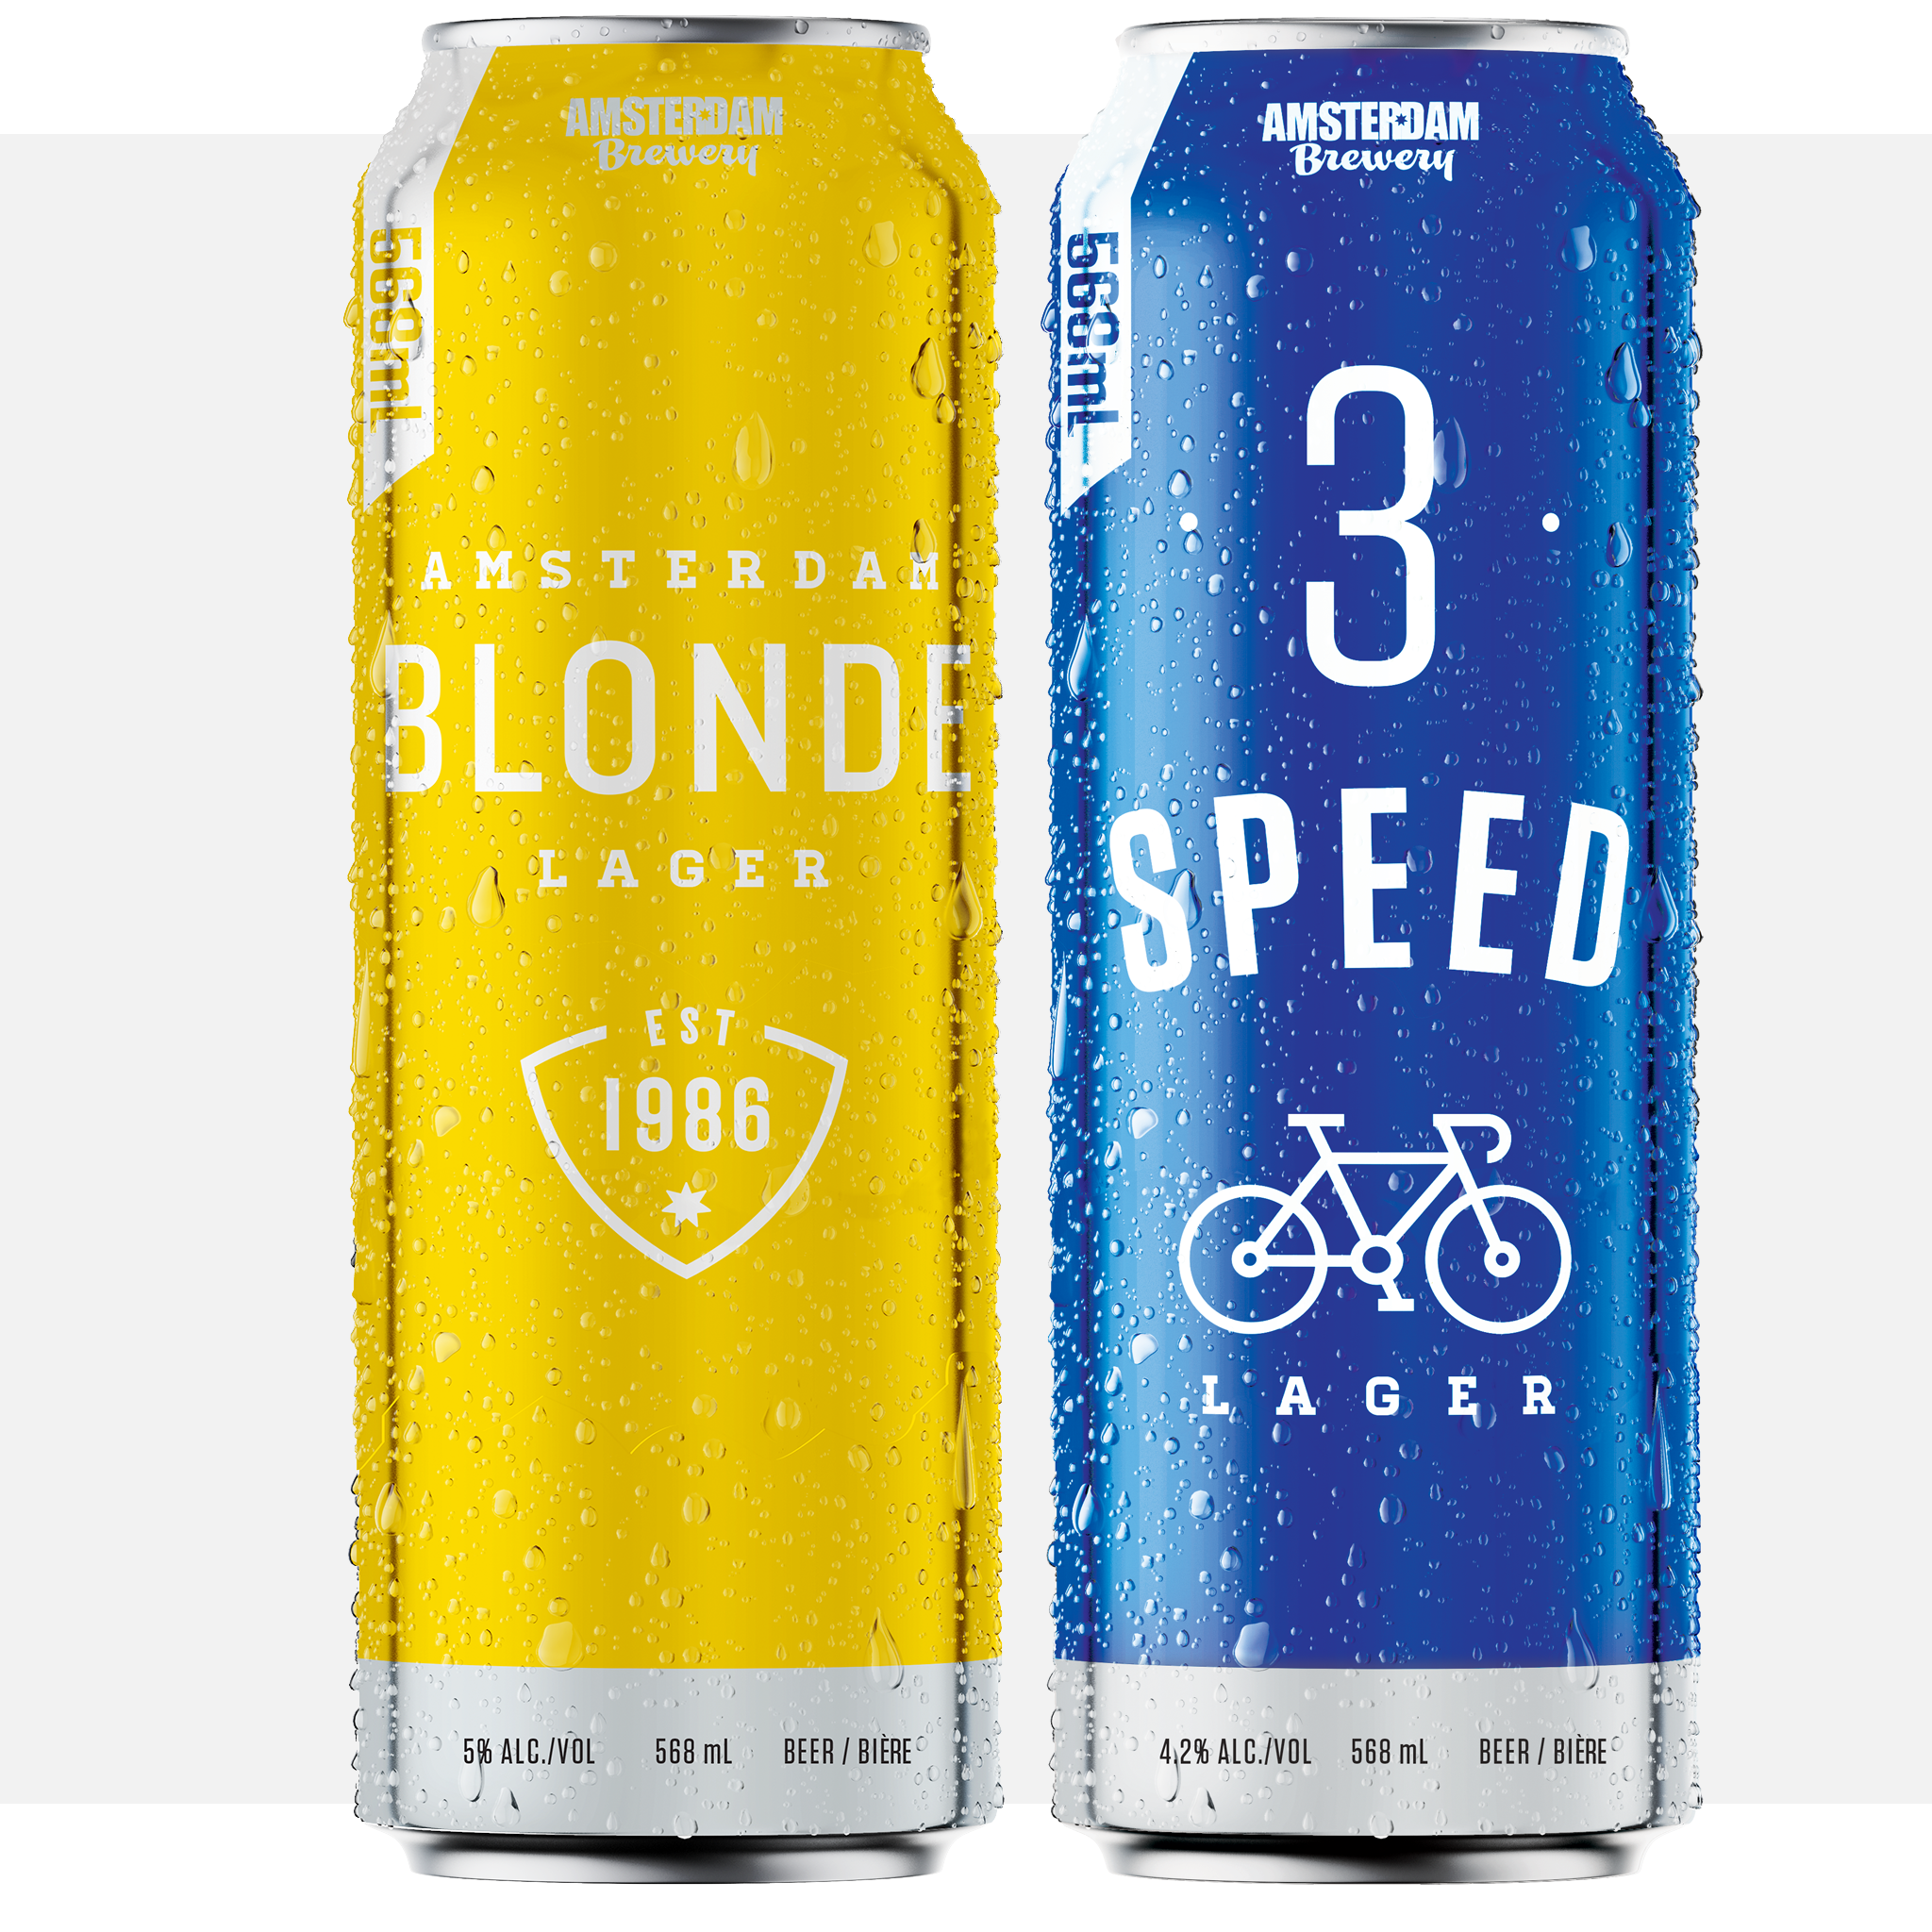 Extra Tall (+20%) 3 Speed & Blonde Mix Pack | 25 Pack*